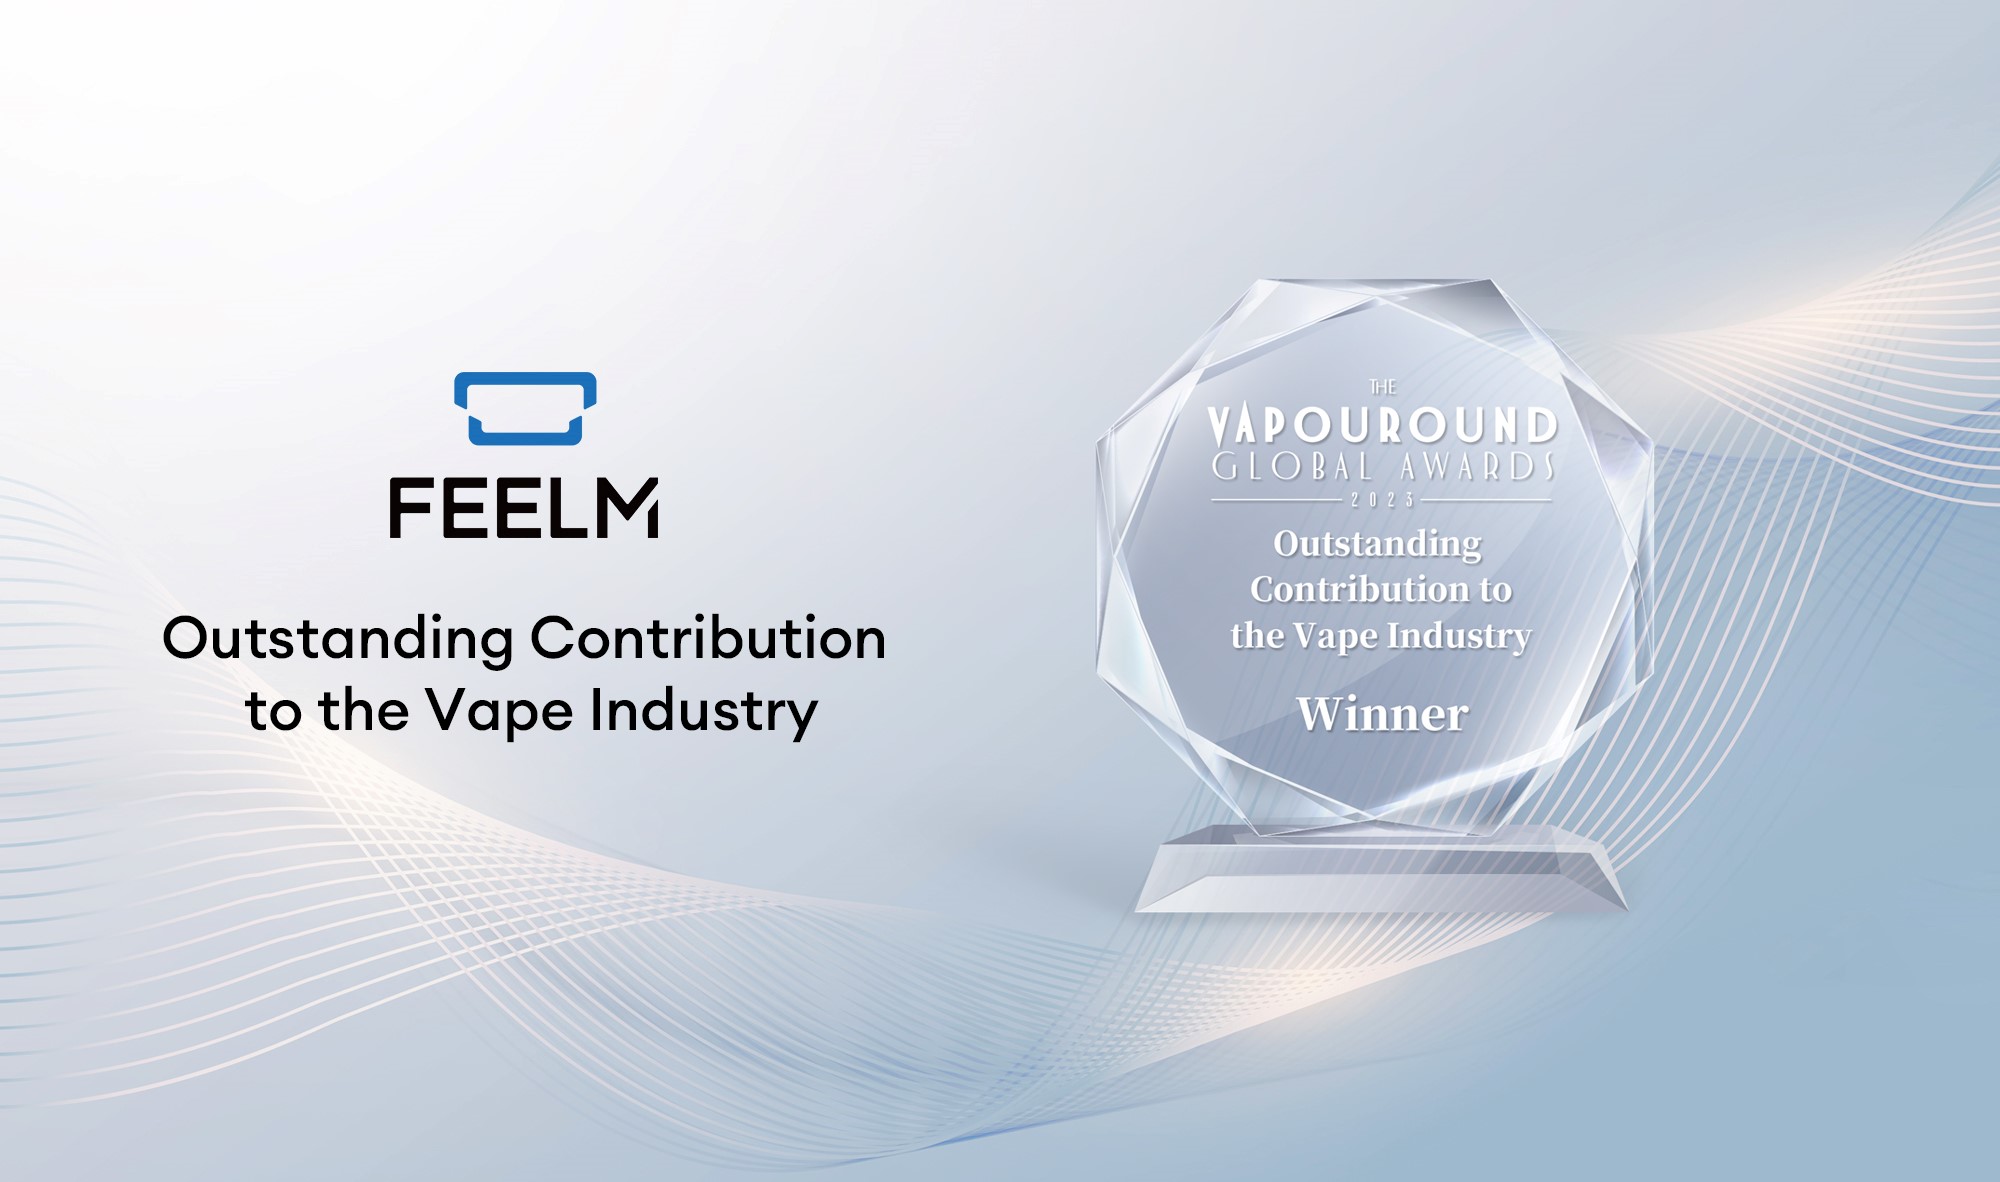 FEELM shares the honor with clients at this year’s Vapouround Awards, winning across four categories